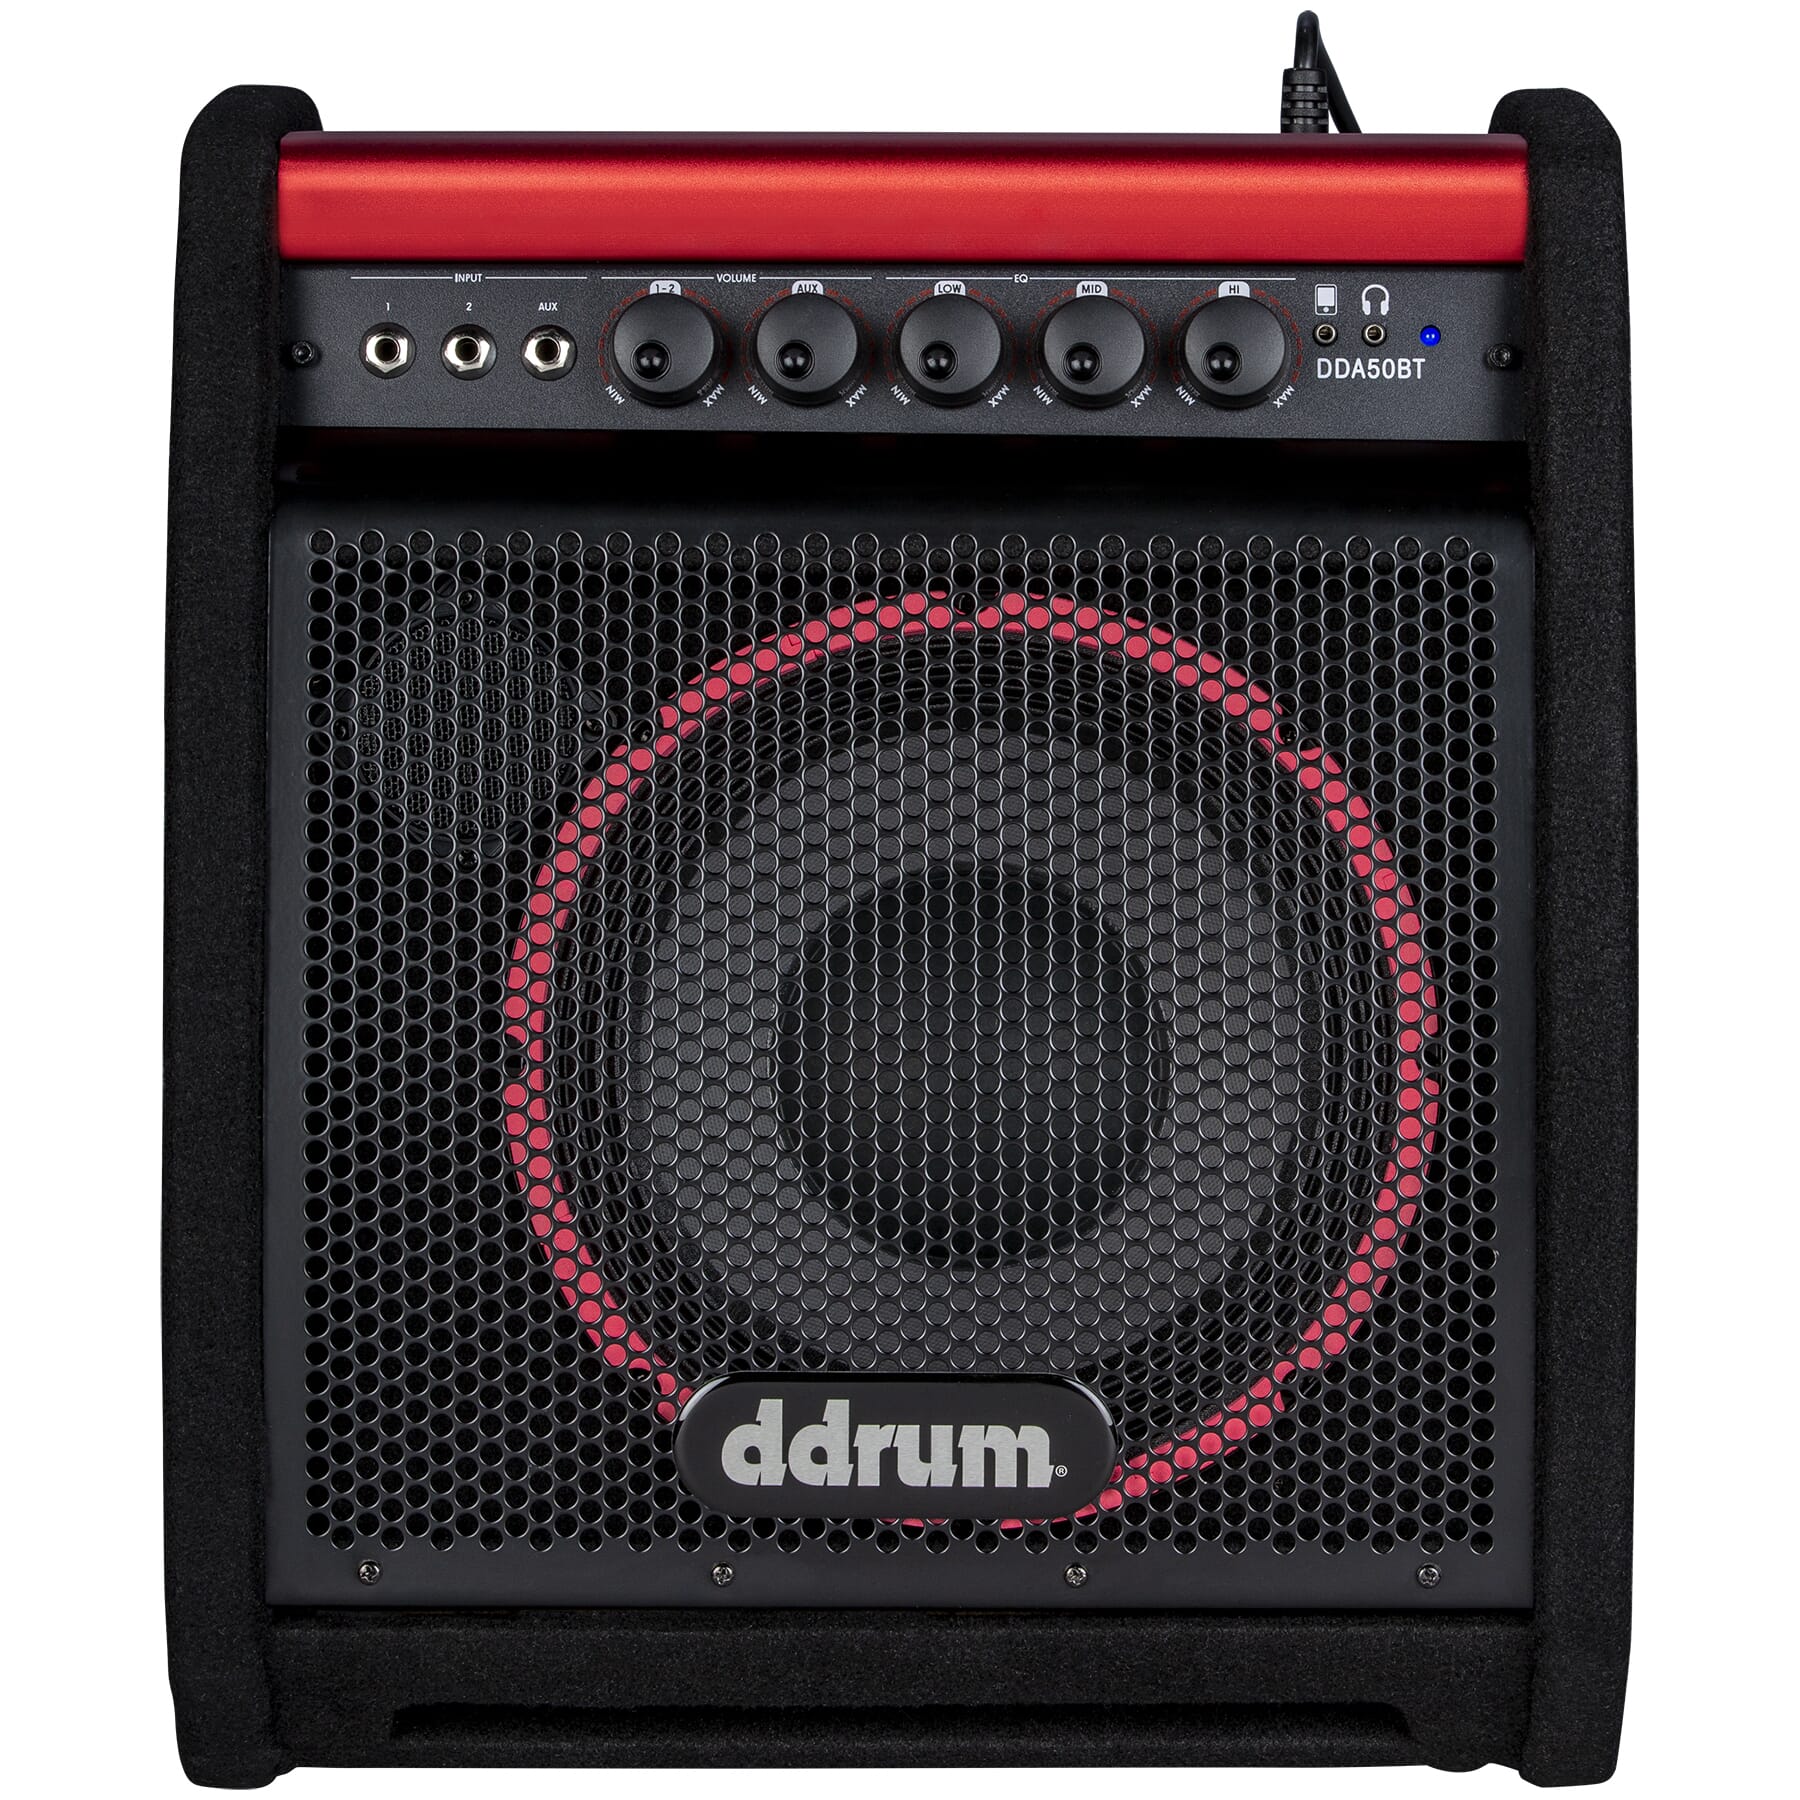 Ddrum 50 watt electronic percussion amp with Blue Tooth | ddrum